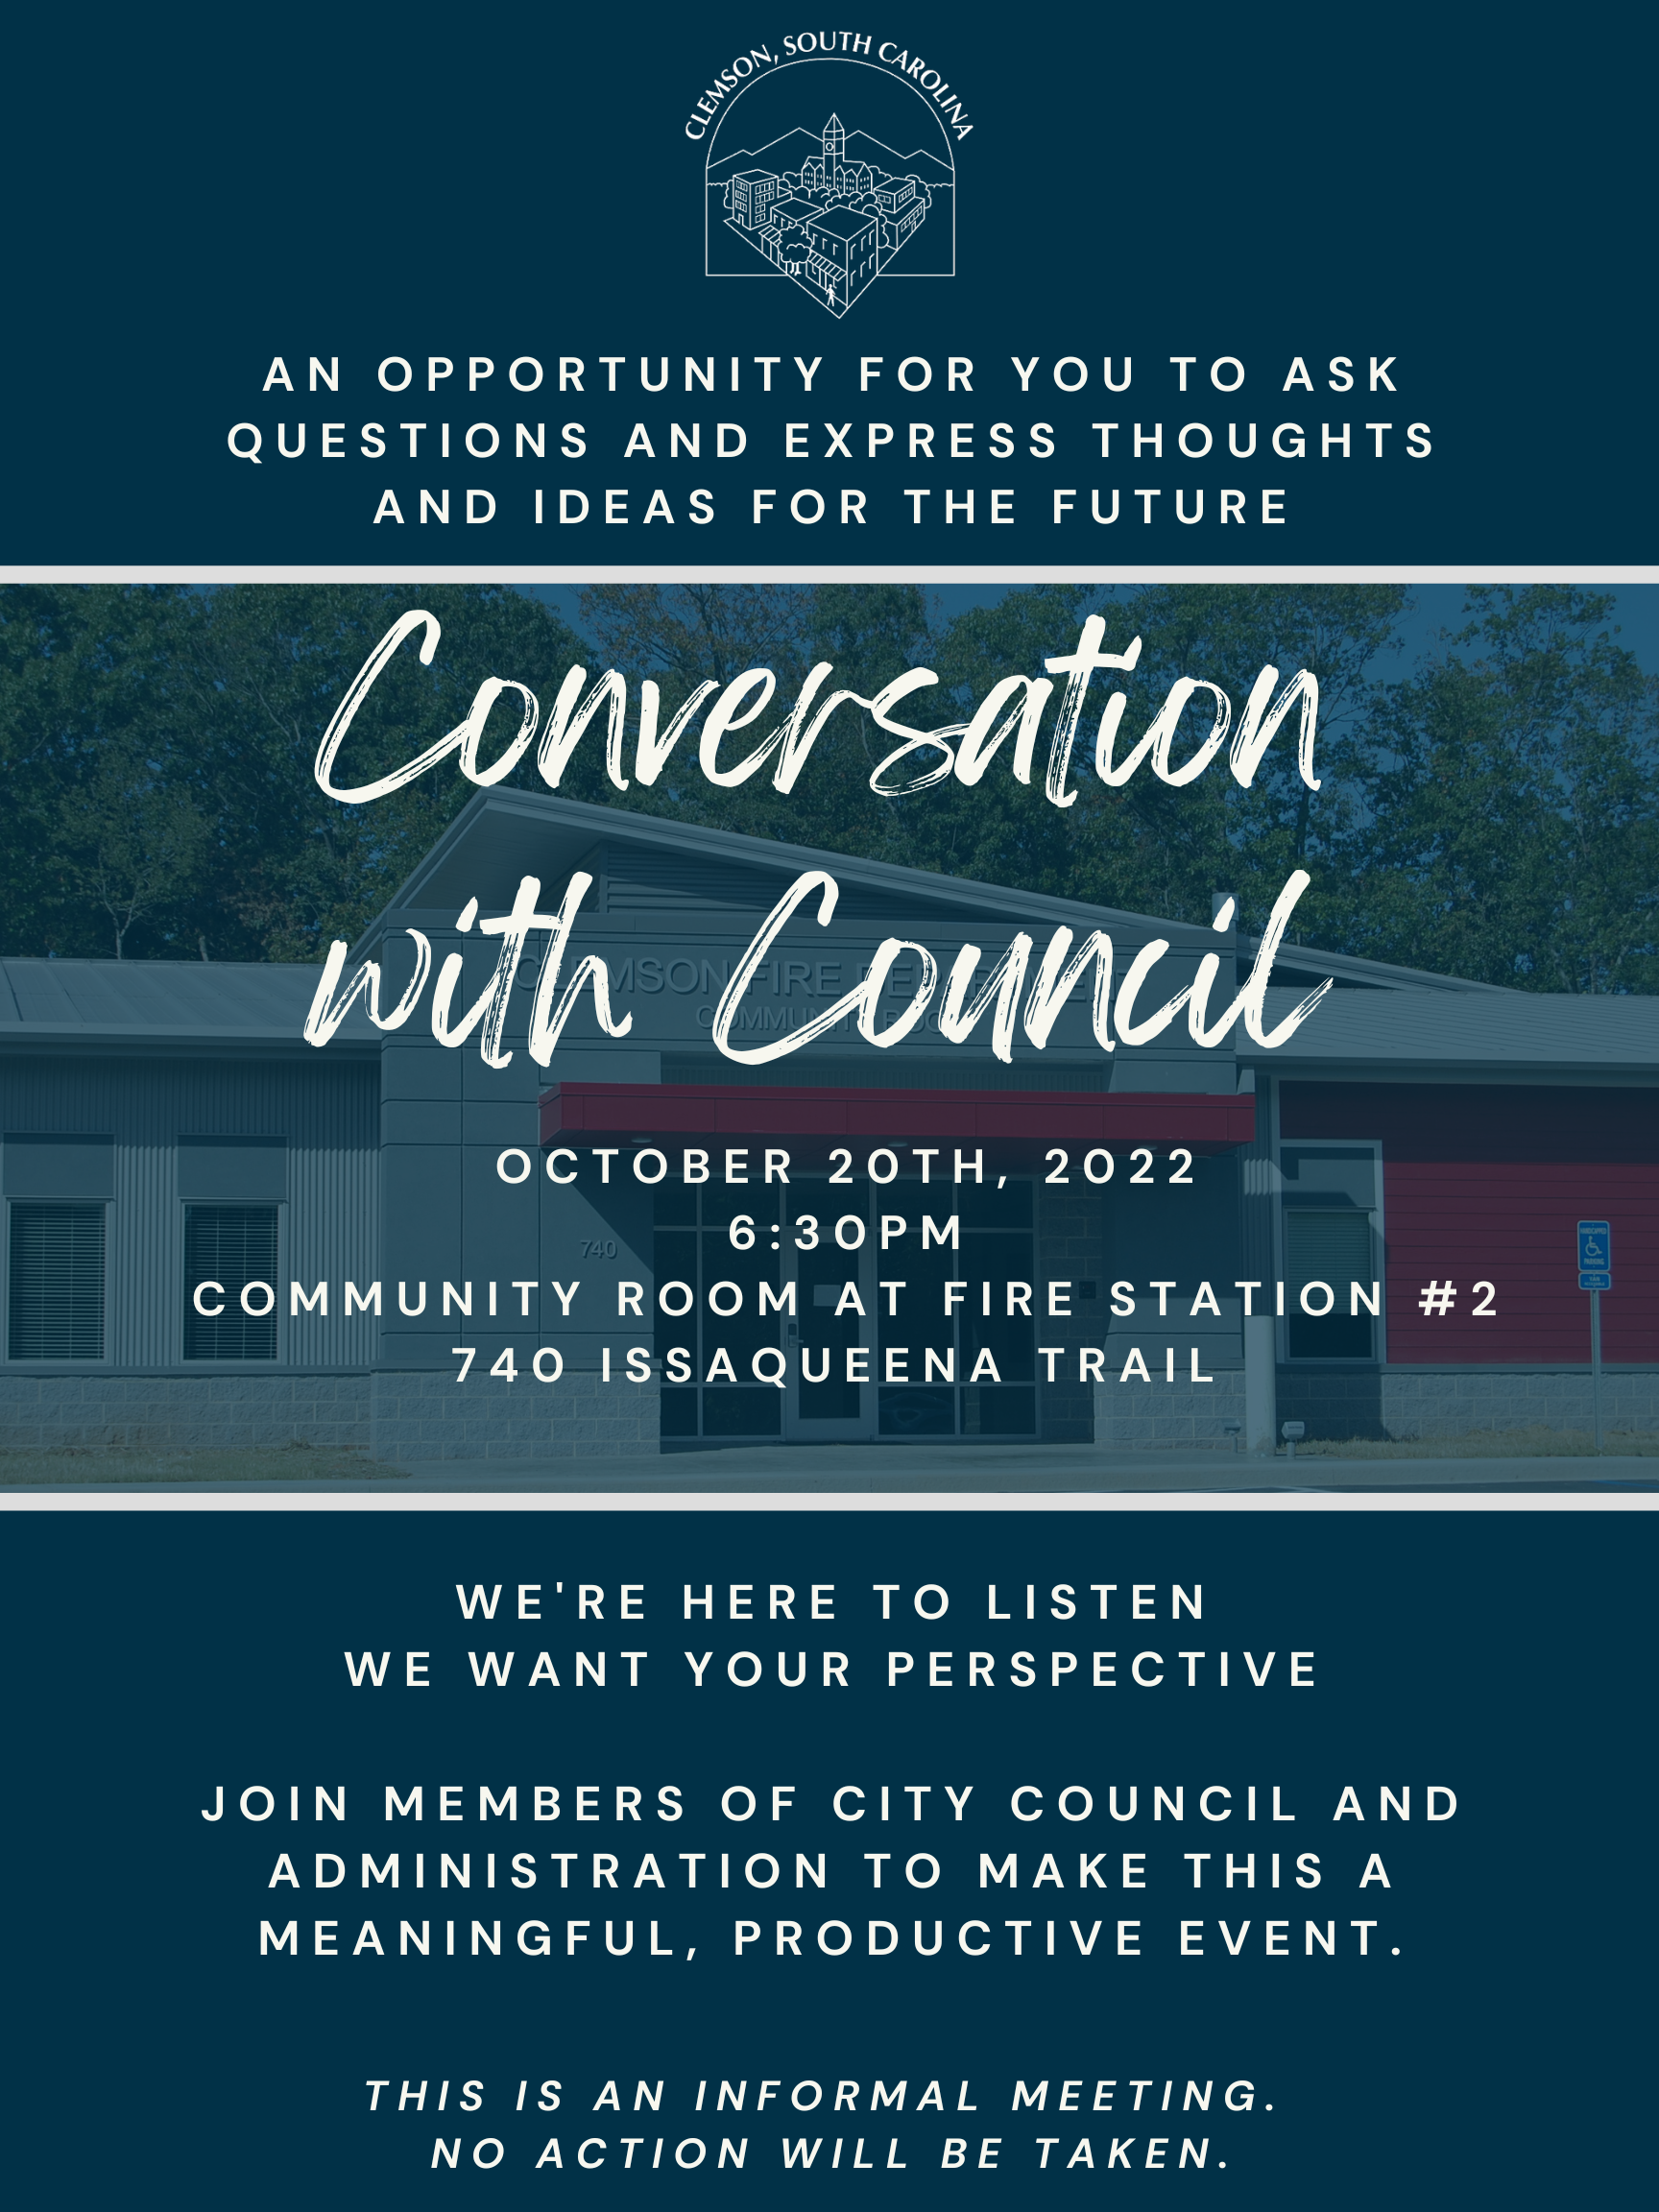 Conversations with Council October 20th